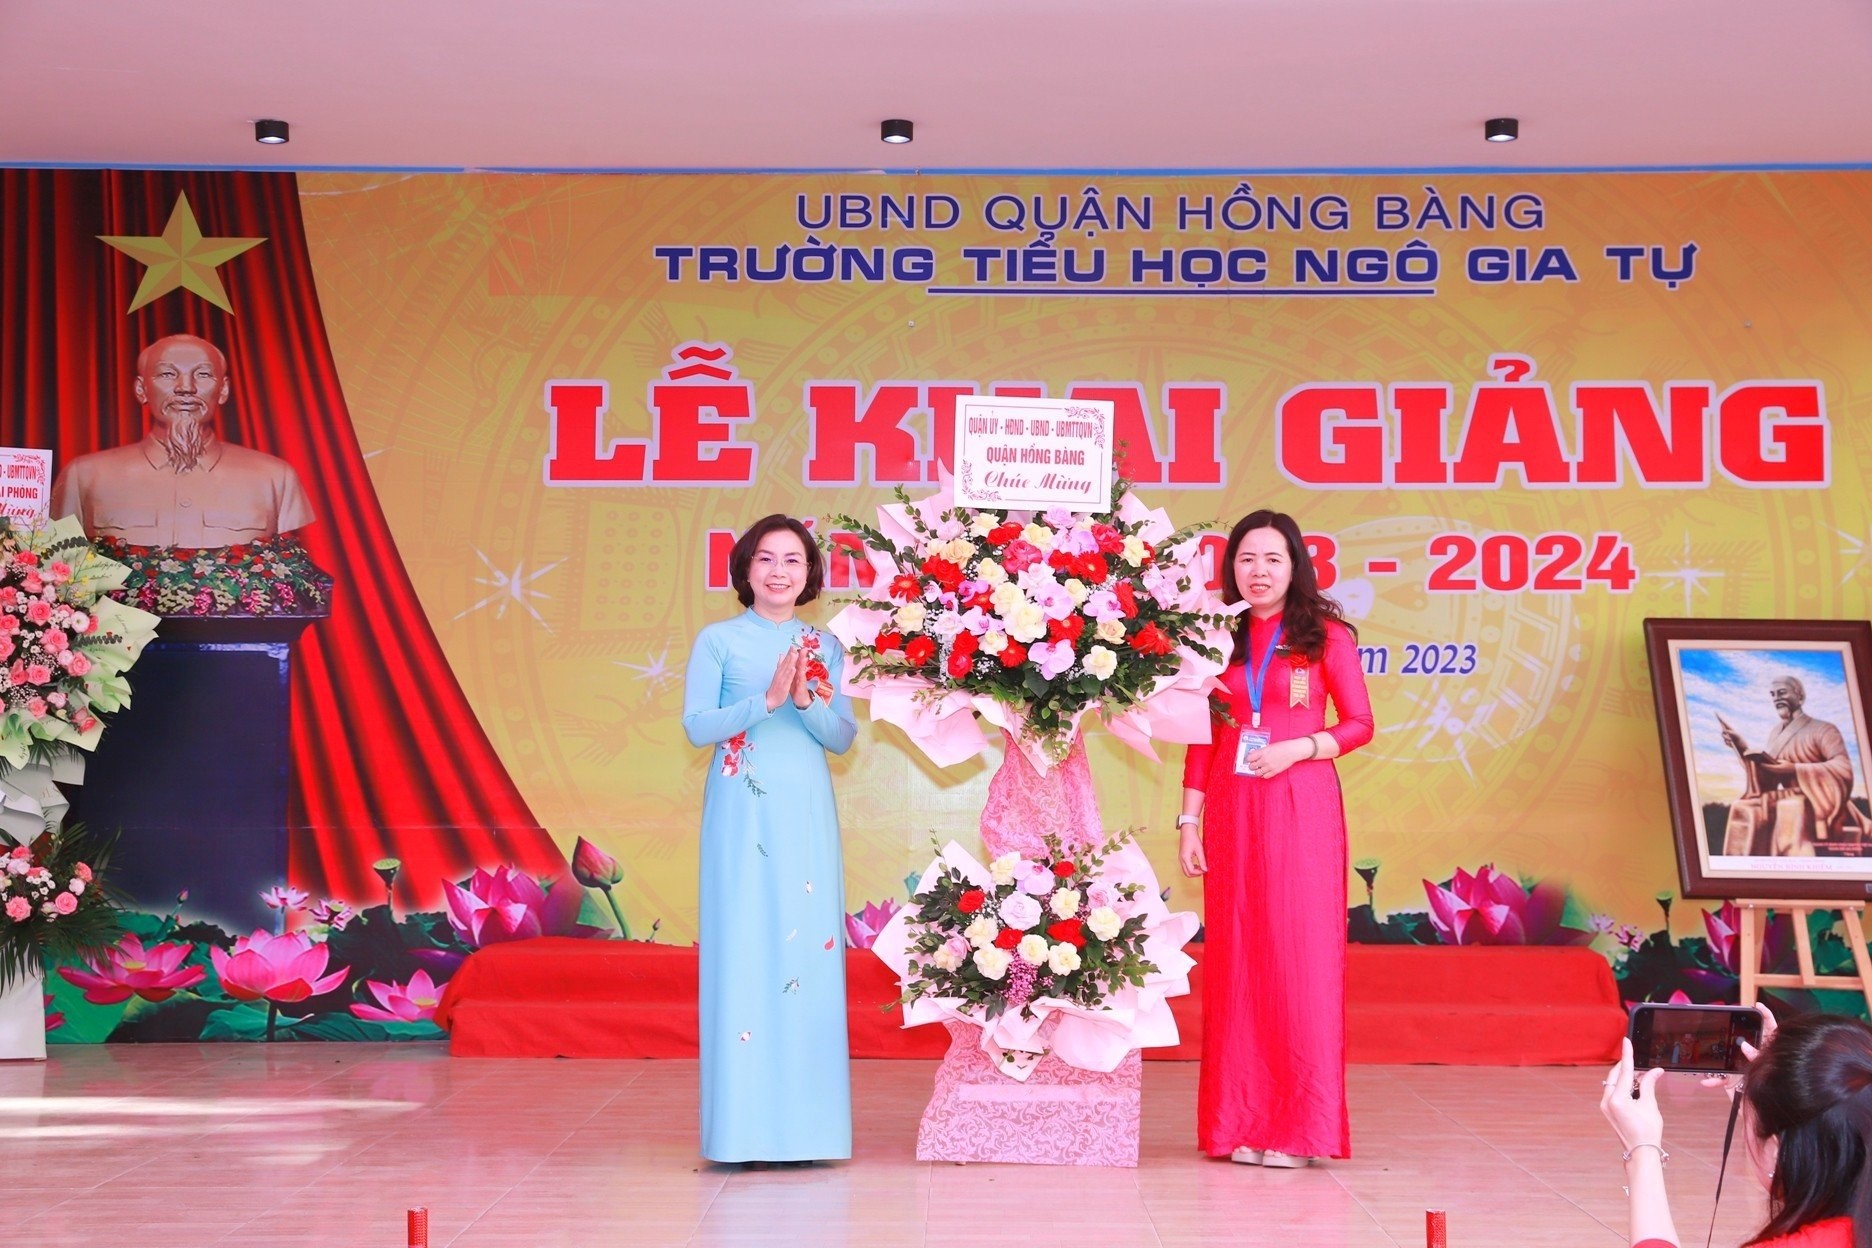 The representative of Hong Bang District People's Committee sent fresh flowers with wishes to teachers and students of Ngo Gia Tu school for a new school year with bumper results.